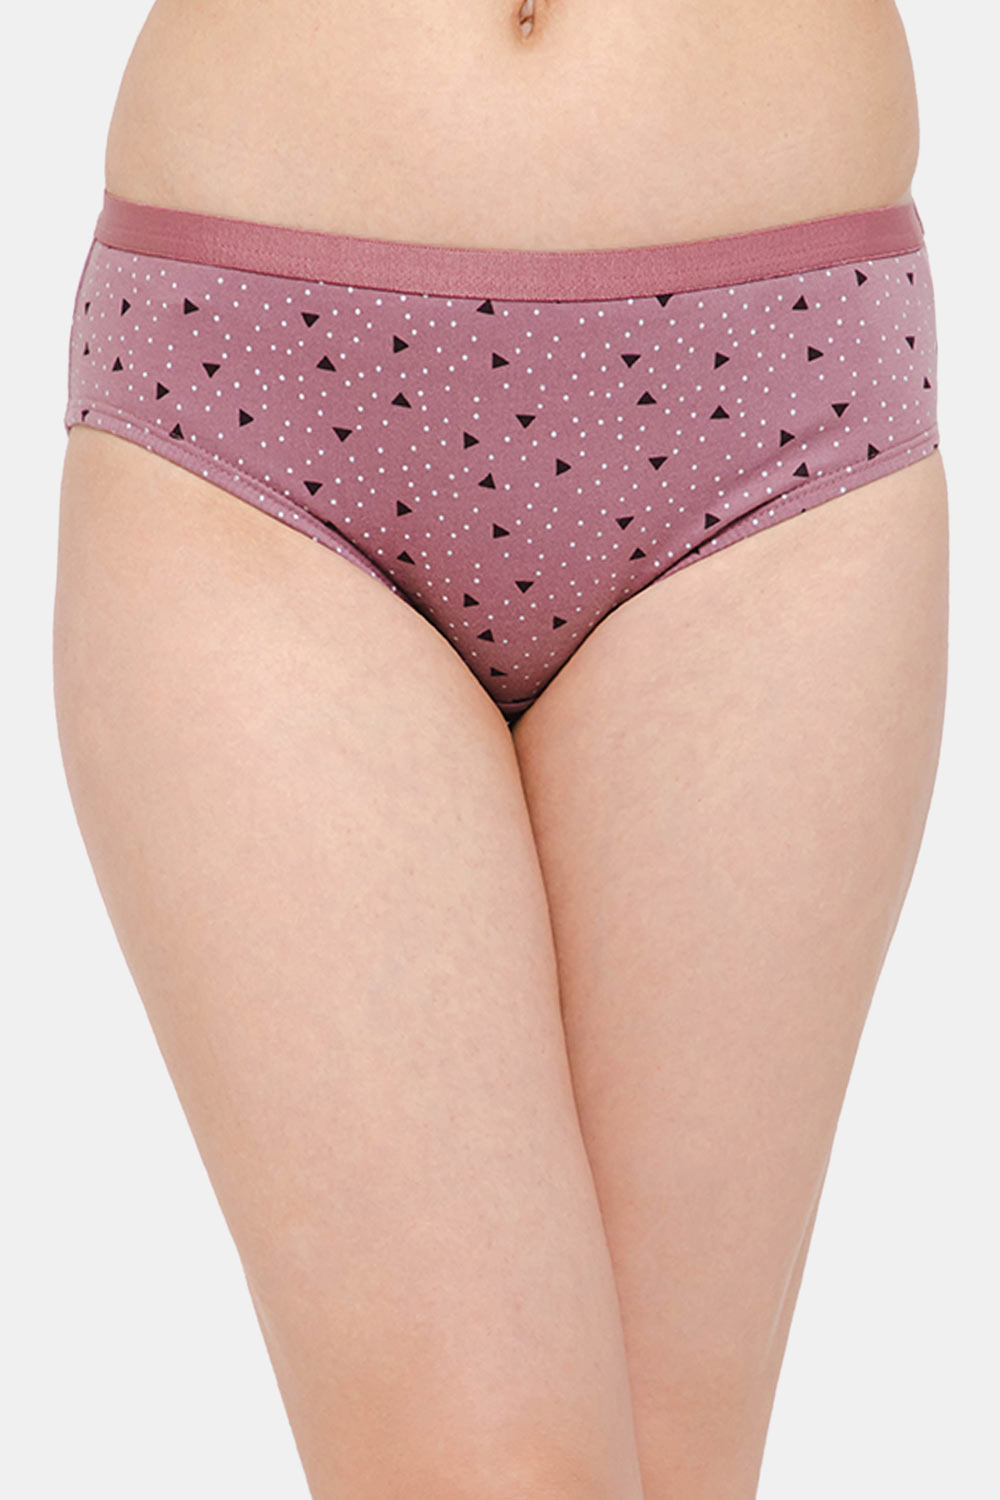 Intimacy Classic Dark Printed Panty - Outer Elastic - Pack of 3